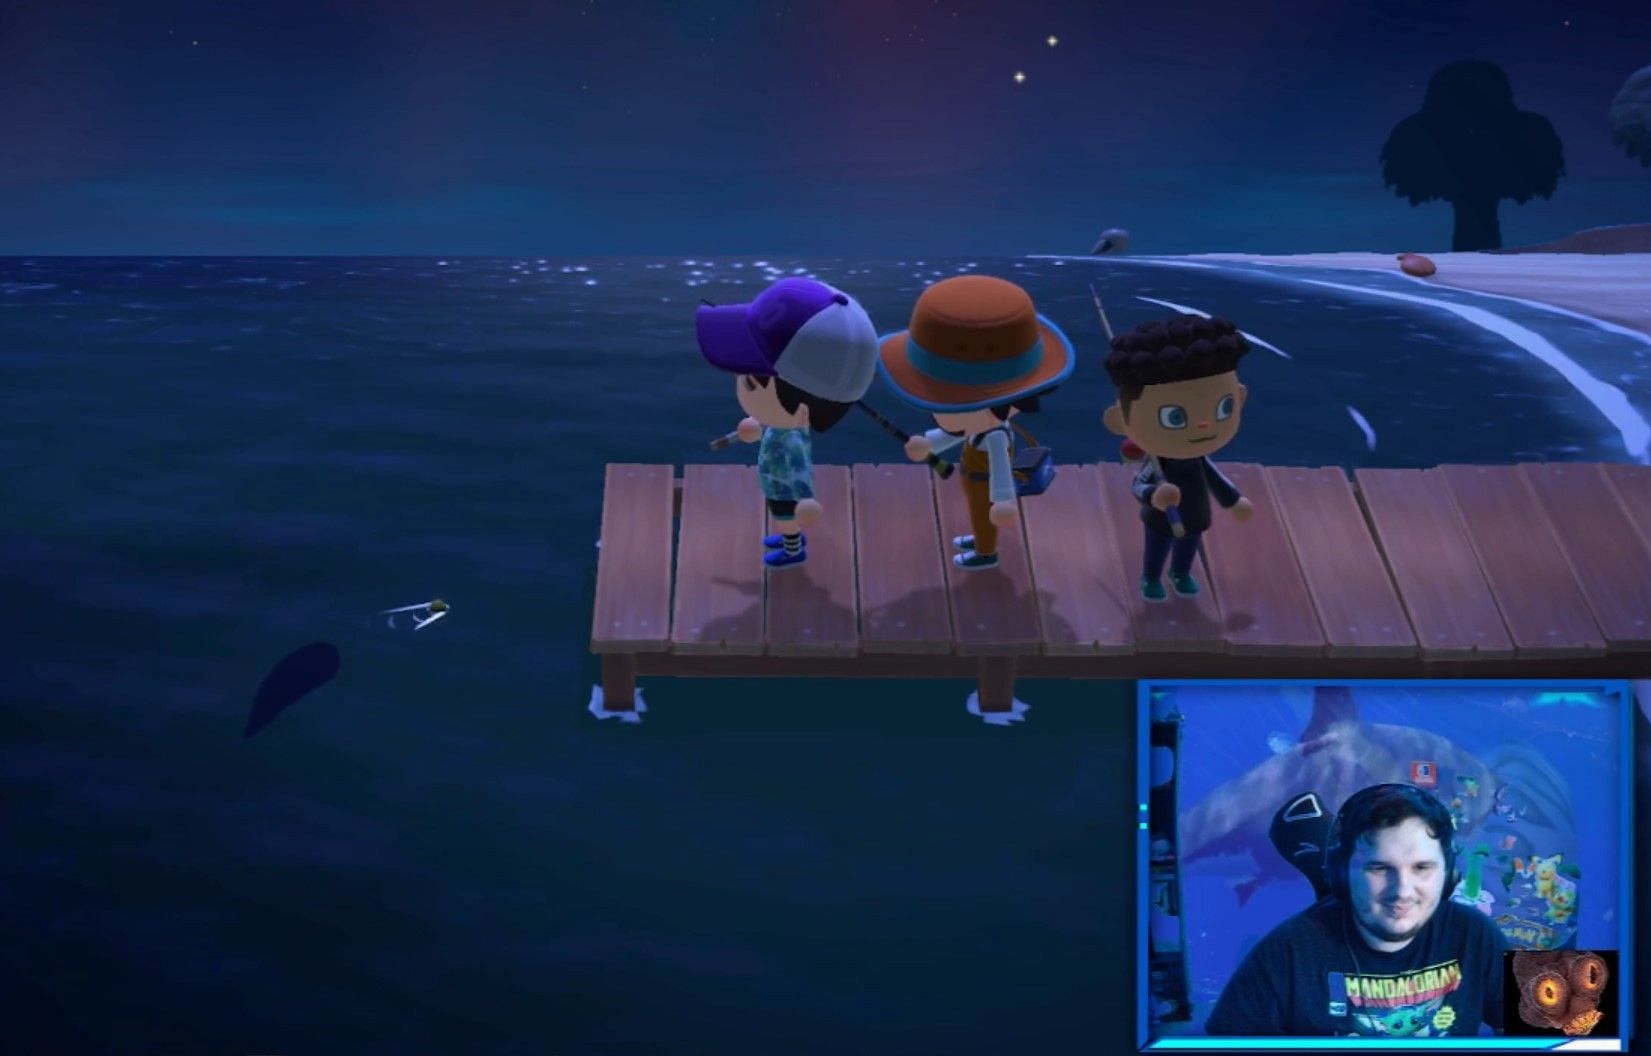 CorruptionQuest shocked to see his friend catch a massive tuna in Animal Crossing: New Horizons (Image via Twitch/CorruptionQuest)